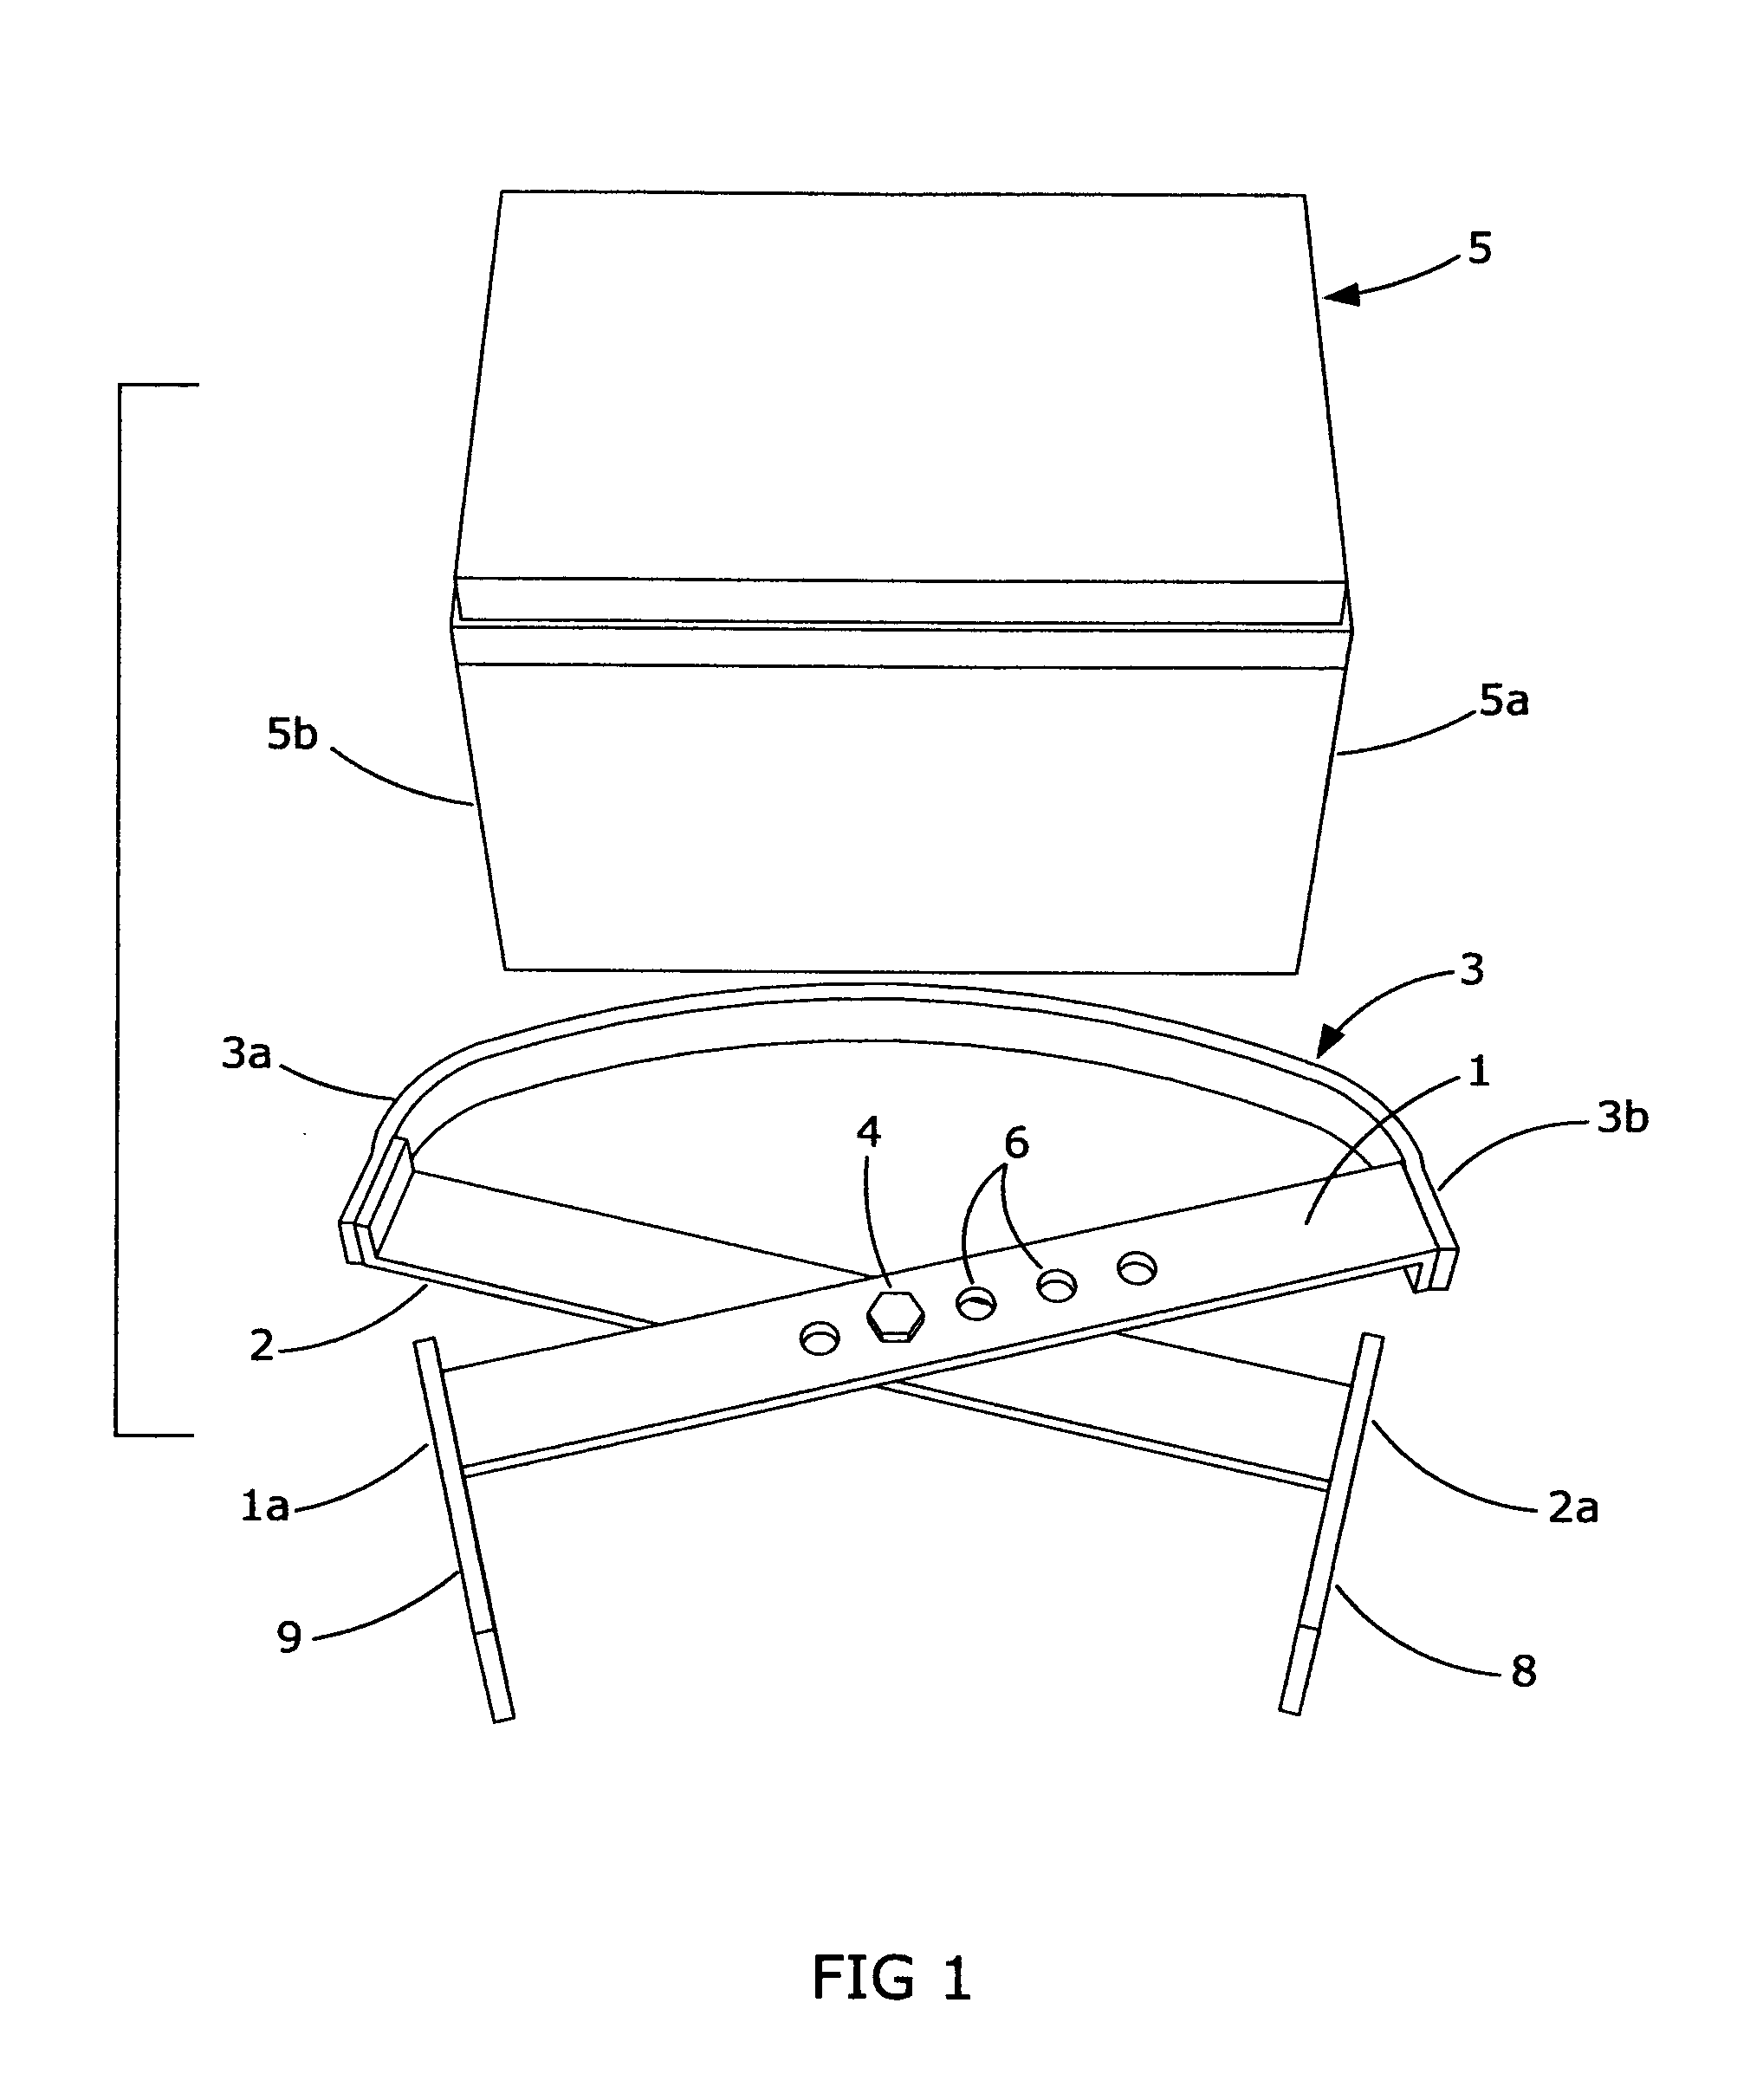 Carrier for installing and removing storage batteries from confined spaces